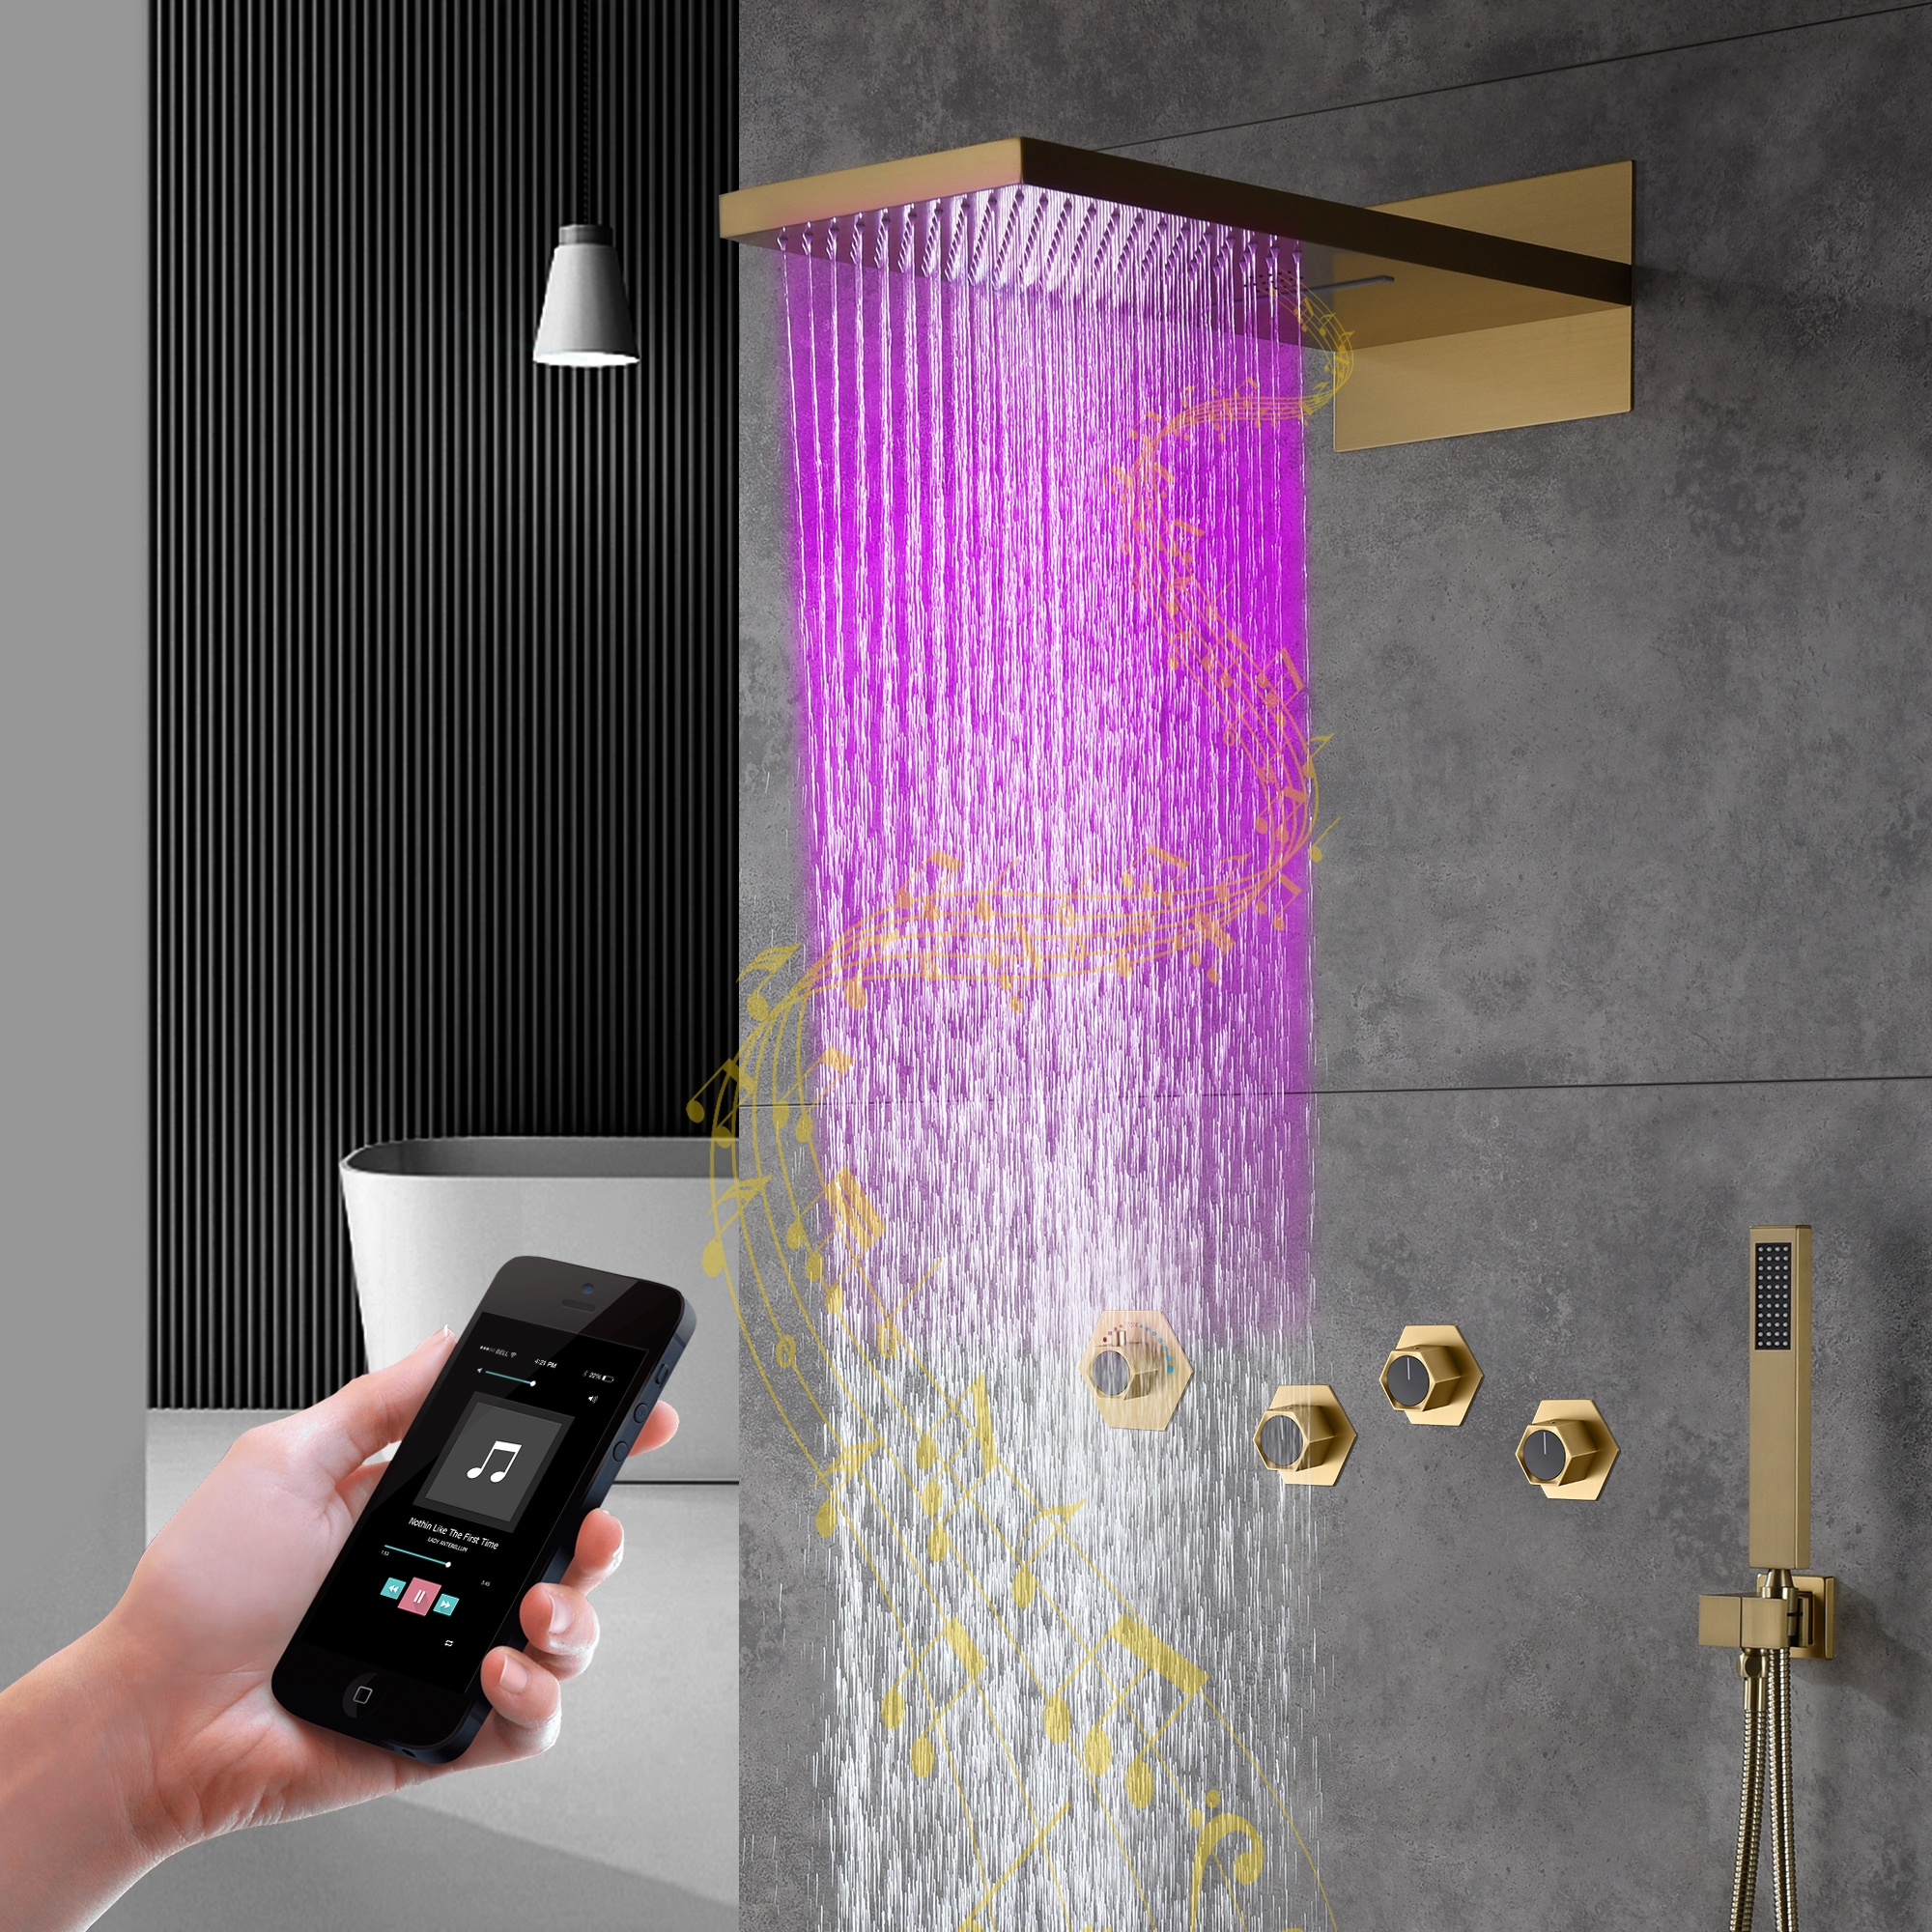 Fontana Brushed Gold Remote Controlled With Thermostatic LED Recessed Ceiling Mount Rainfall And Waterfall Musical Outlet Rain